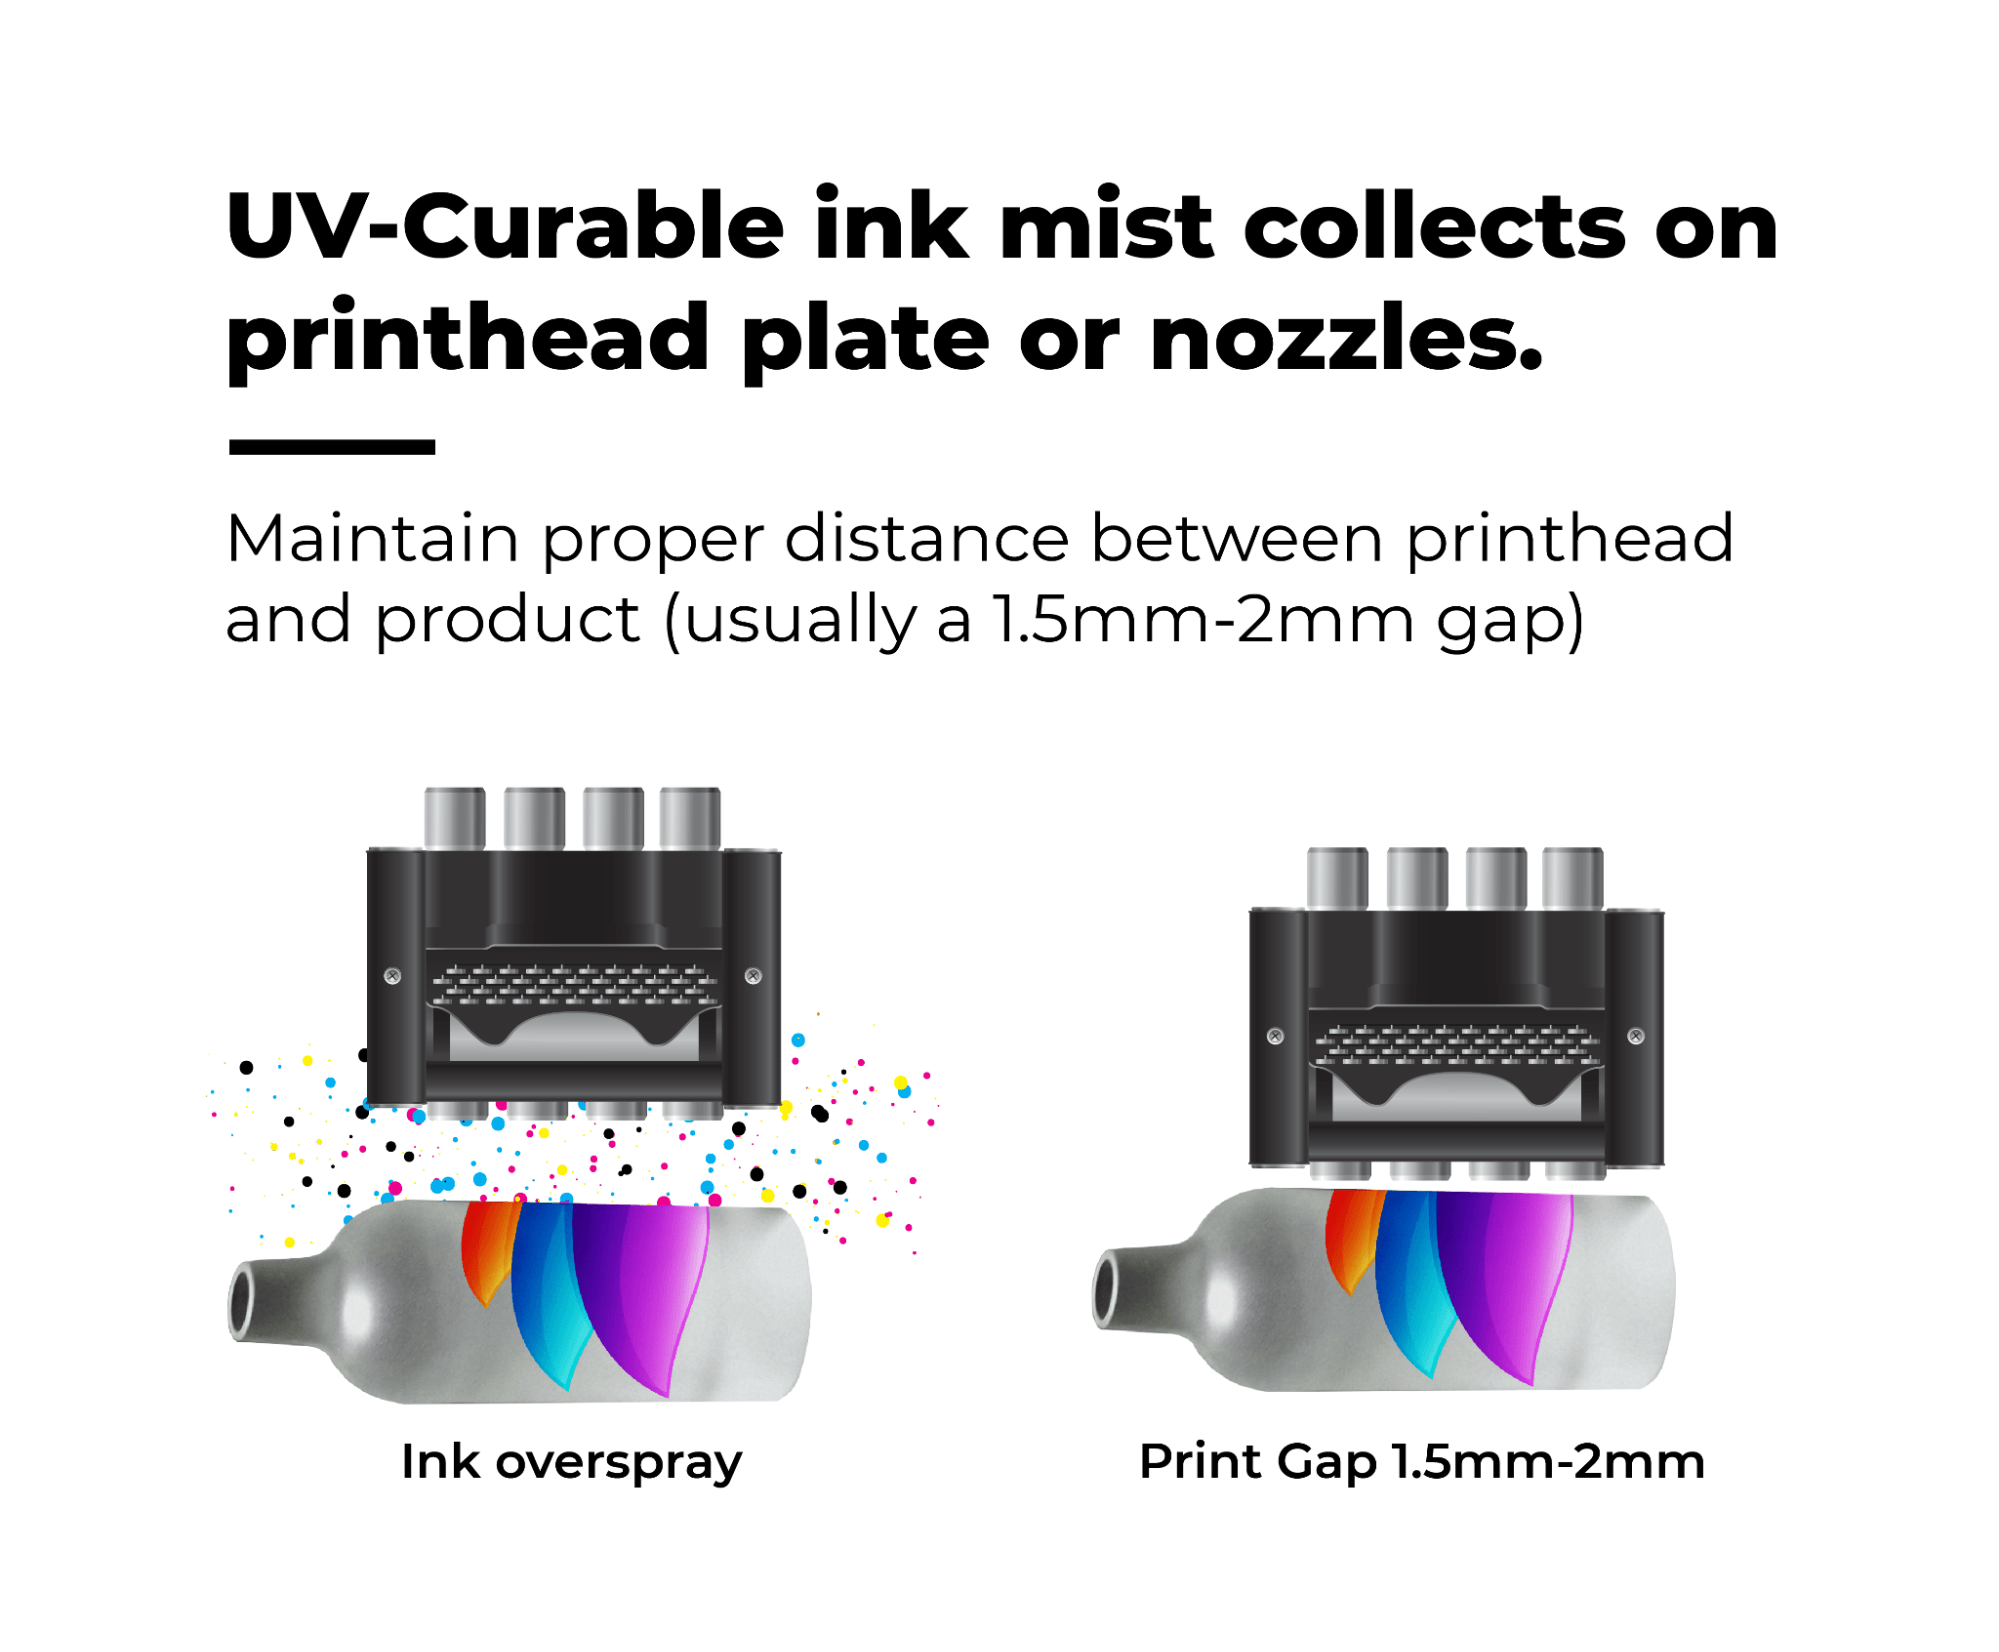 Image of UV curable ink mist collecting on printhead